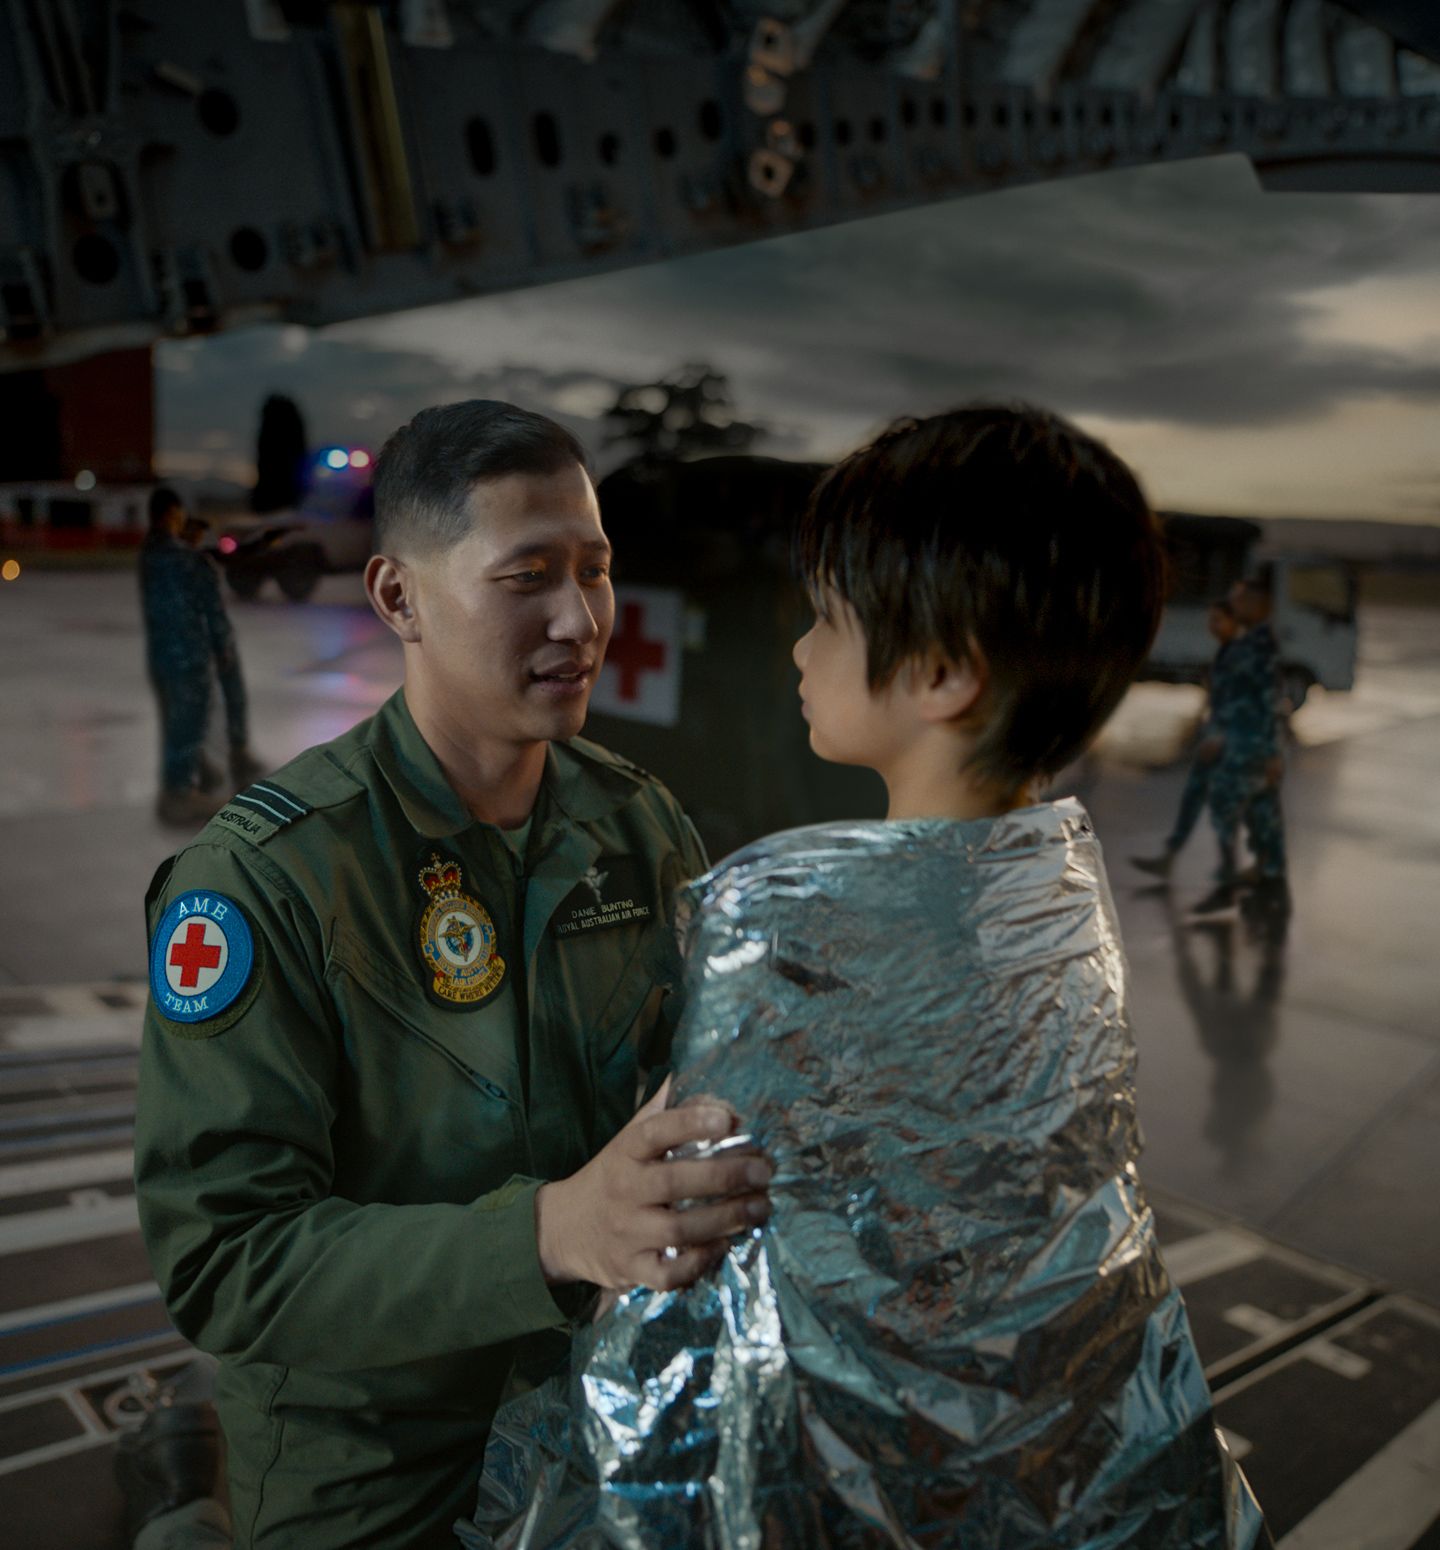 A member of the Air Force wrapping a blanket around a child.